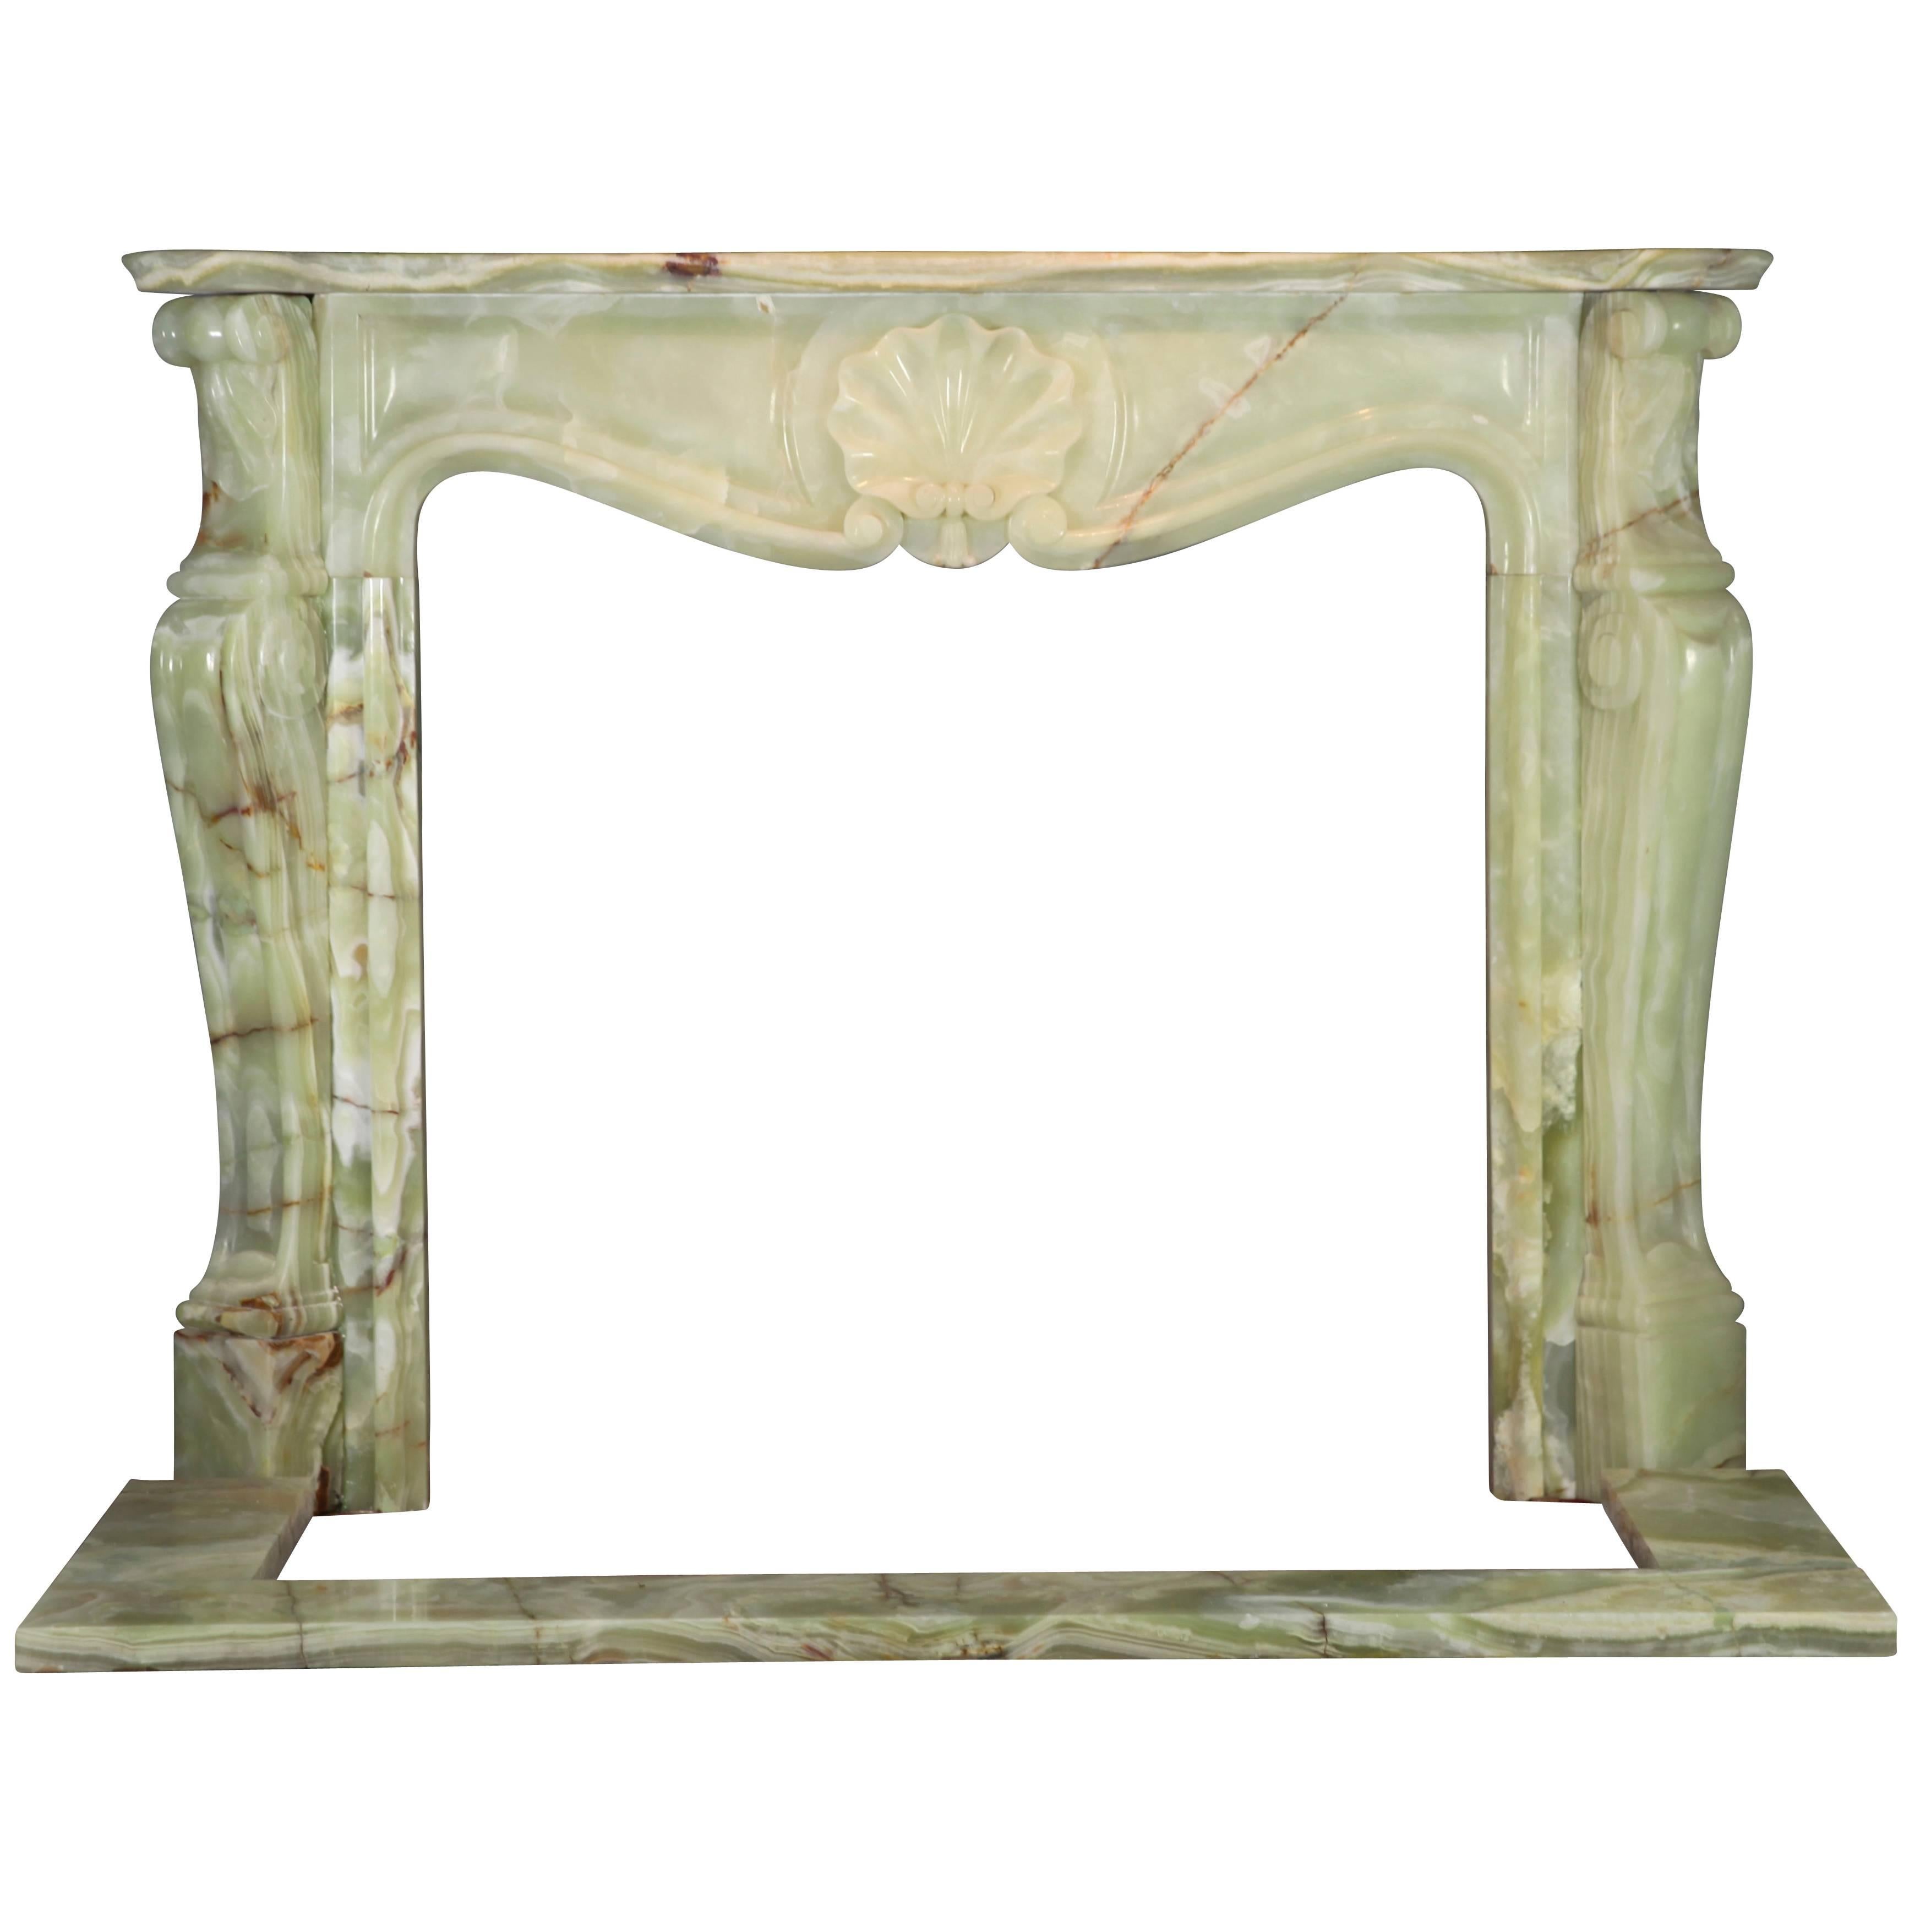 20th Century Mid-War Fireplace Mantel in Onyx